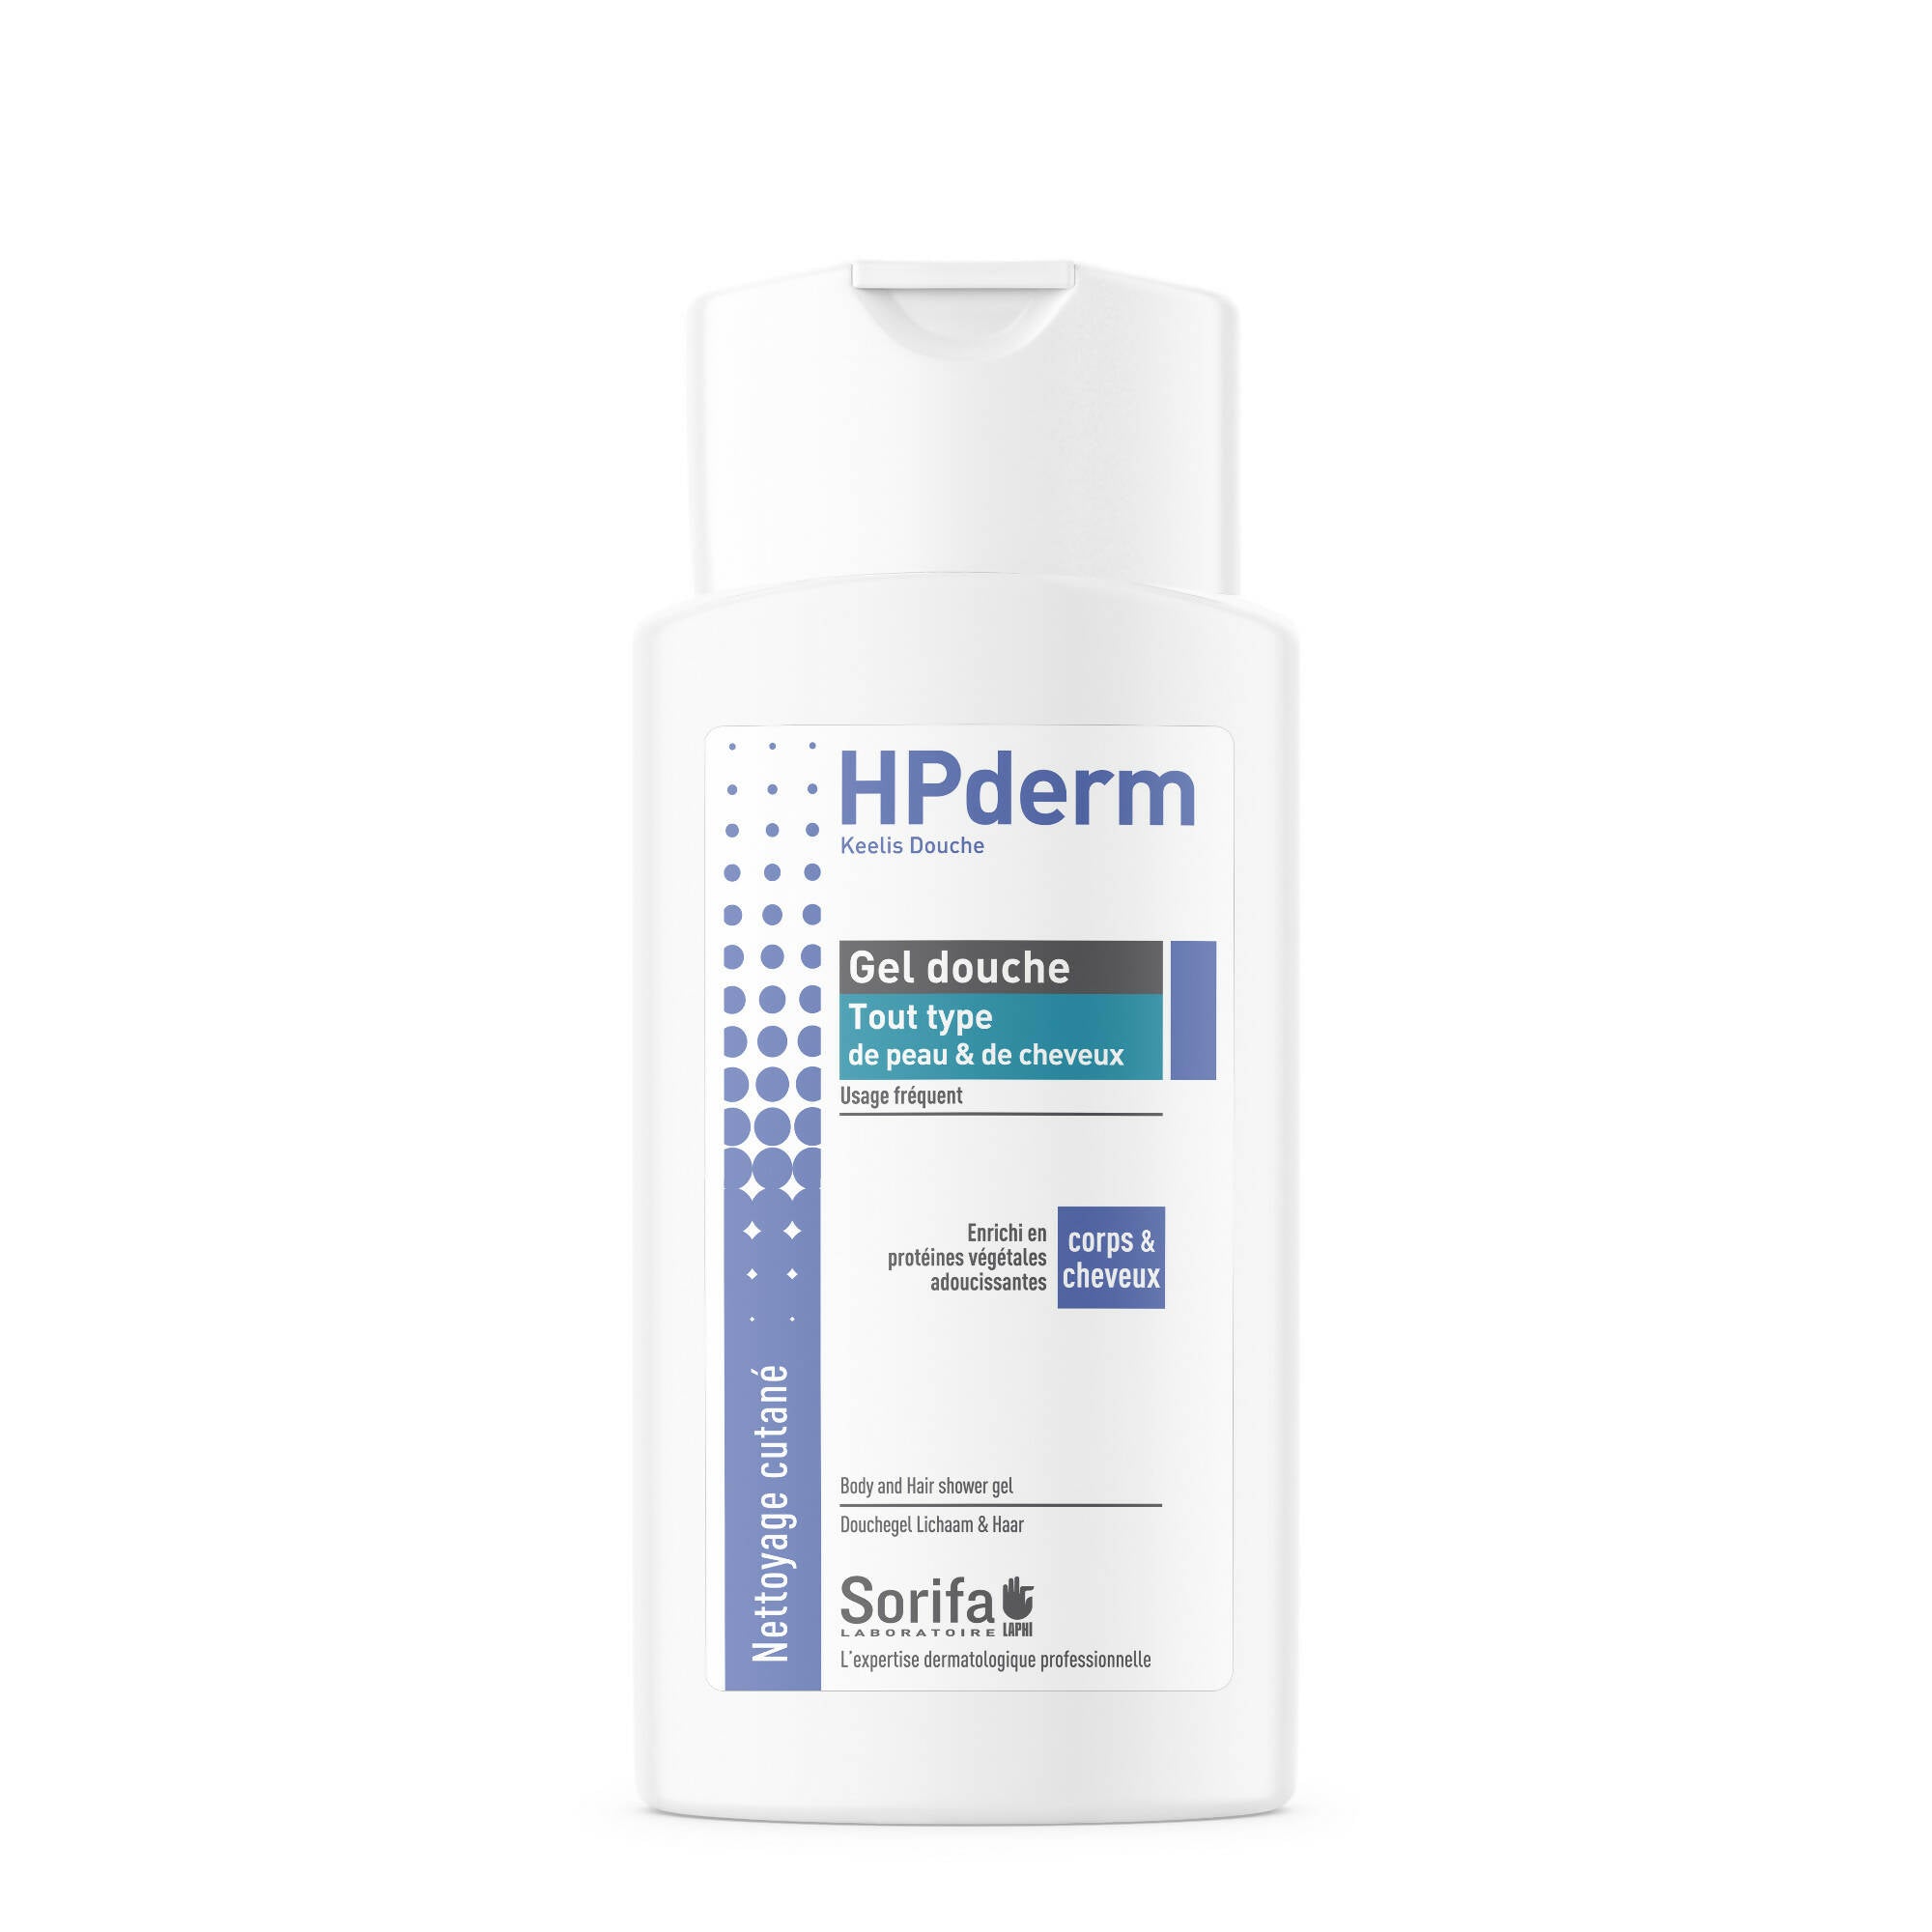 SORIFA - Pack of 5 - HPderm Shower gel - 2 in 1 body and hair - Dermo-protective - All skin and hair types - with oat proteins - Frequent use - Neutral pH, soap-free - 200 ml bottle - 0